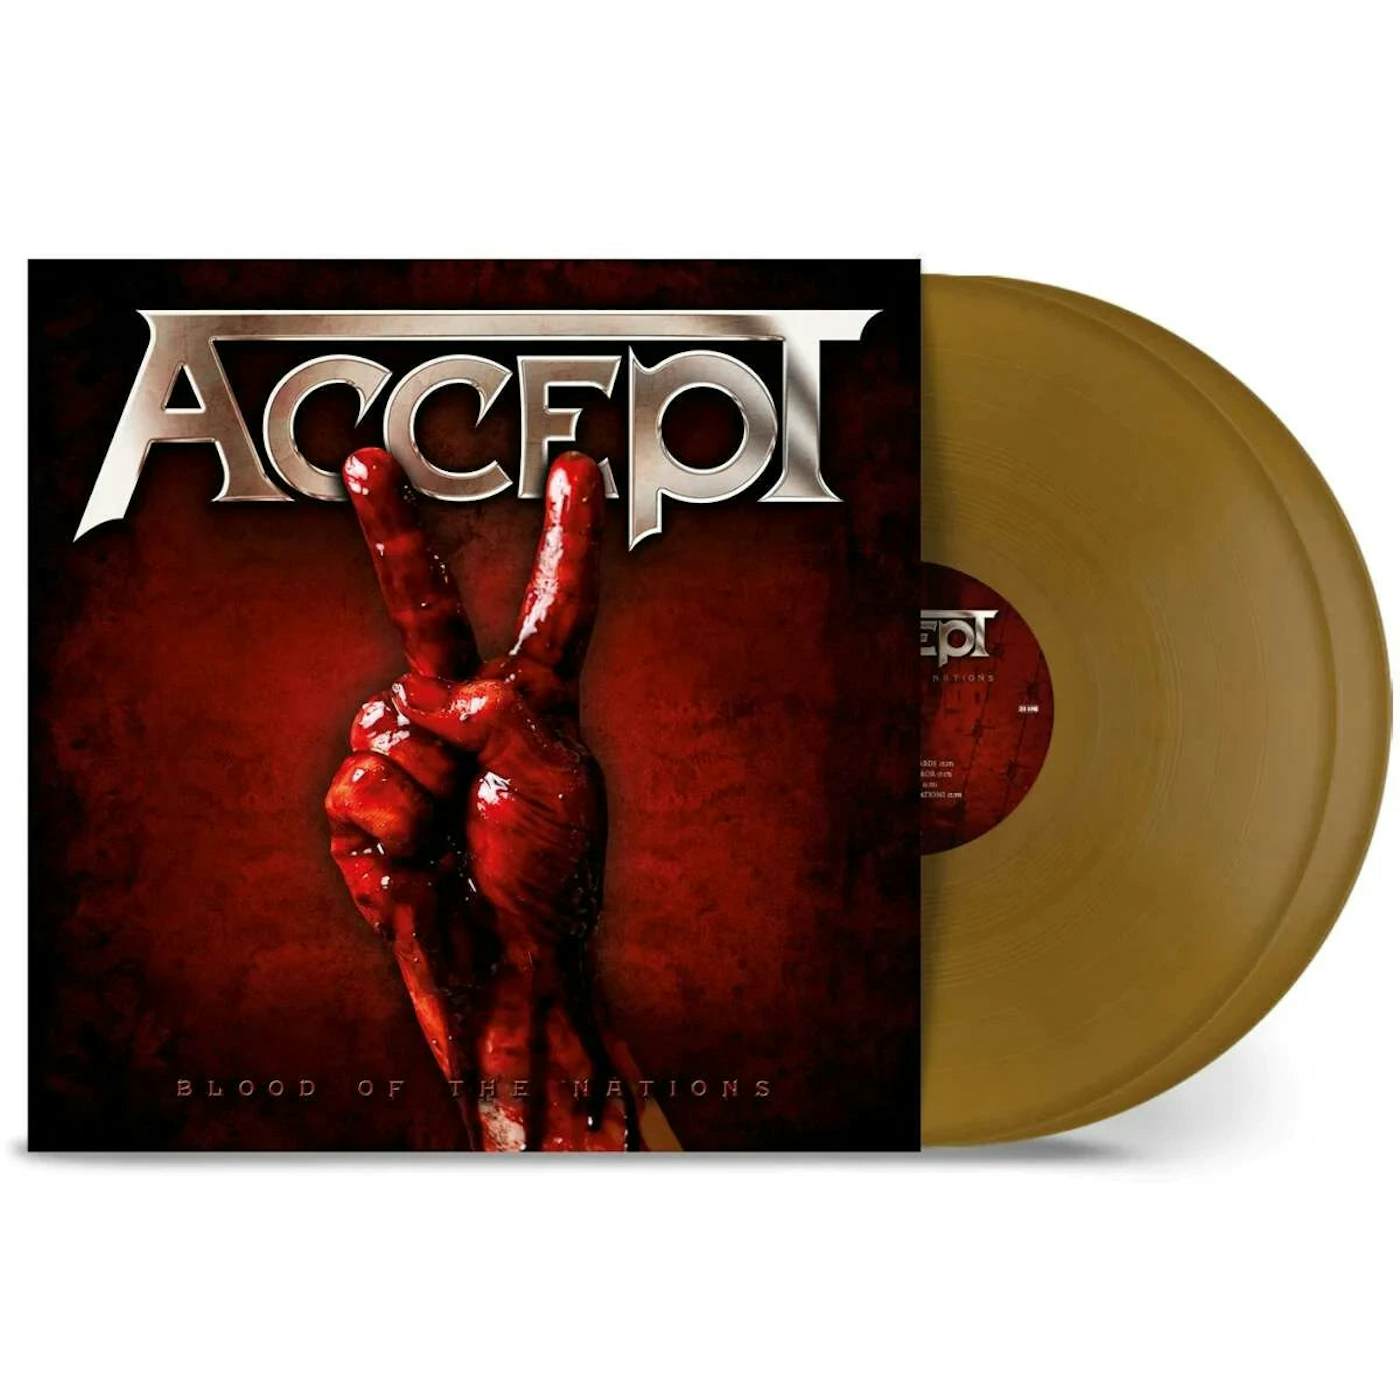 ACCEPT RUSSIAN ROULETTE NEW CD 5013929912922